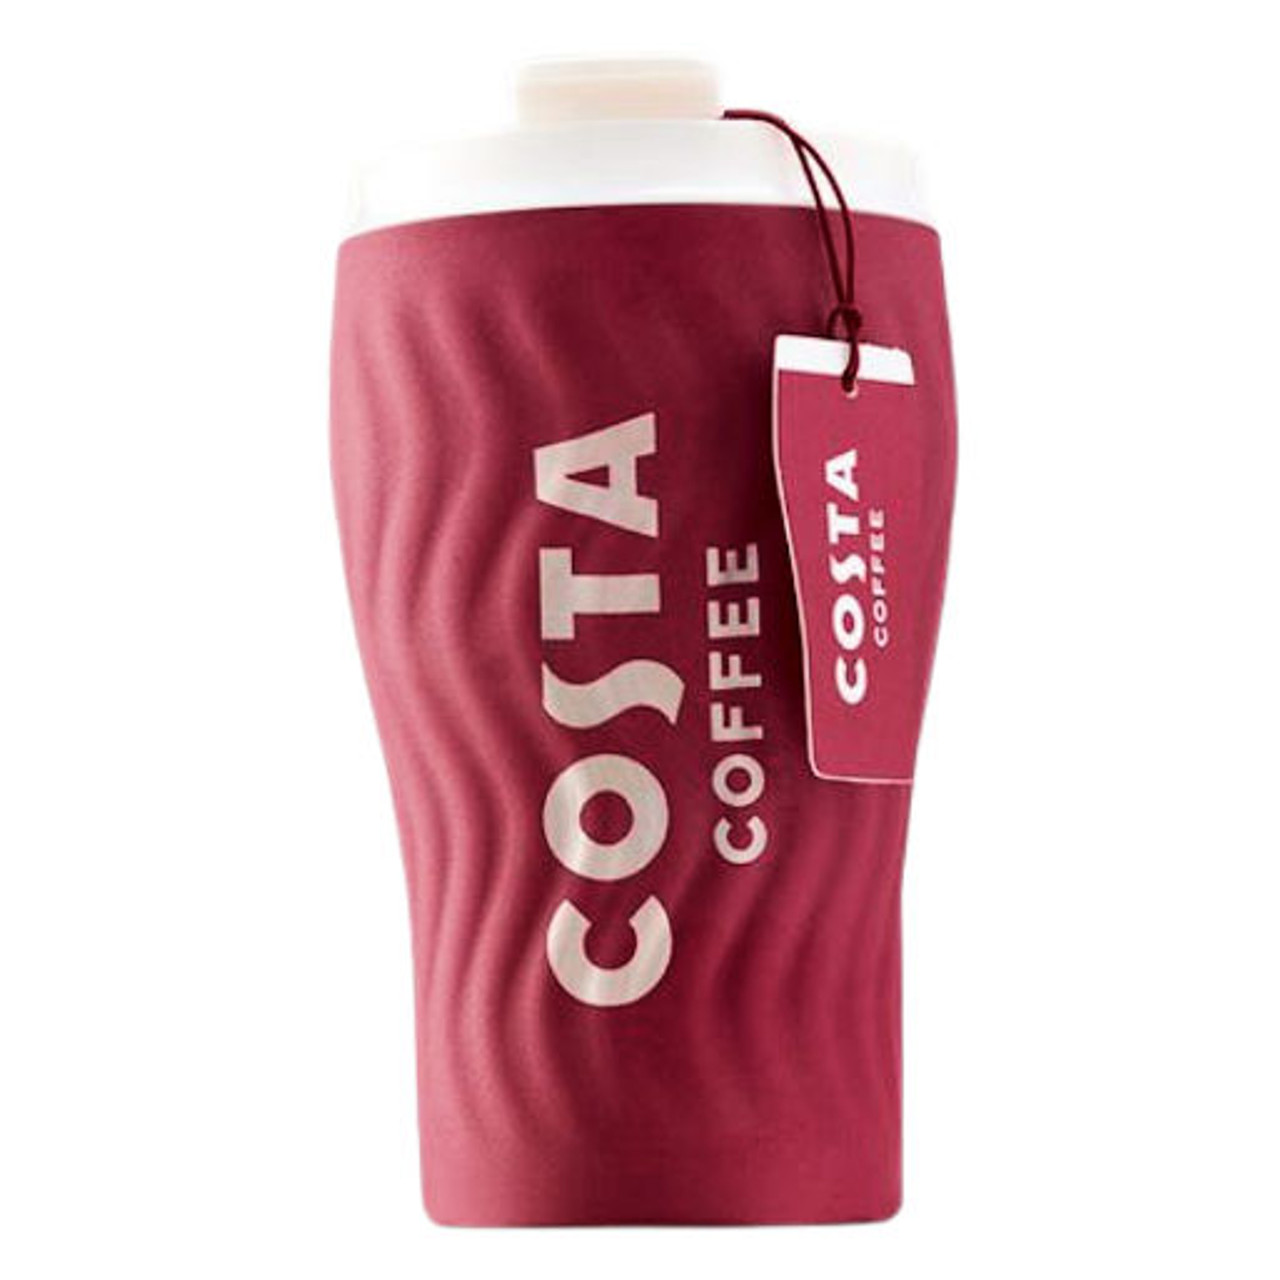 Costa Coffee Cups & Saucer Travel Glass Bottles Mugs Latte Glasses Many  Designs